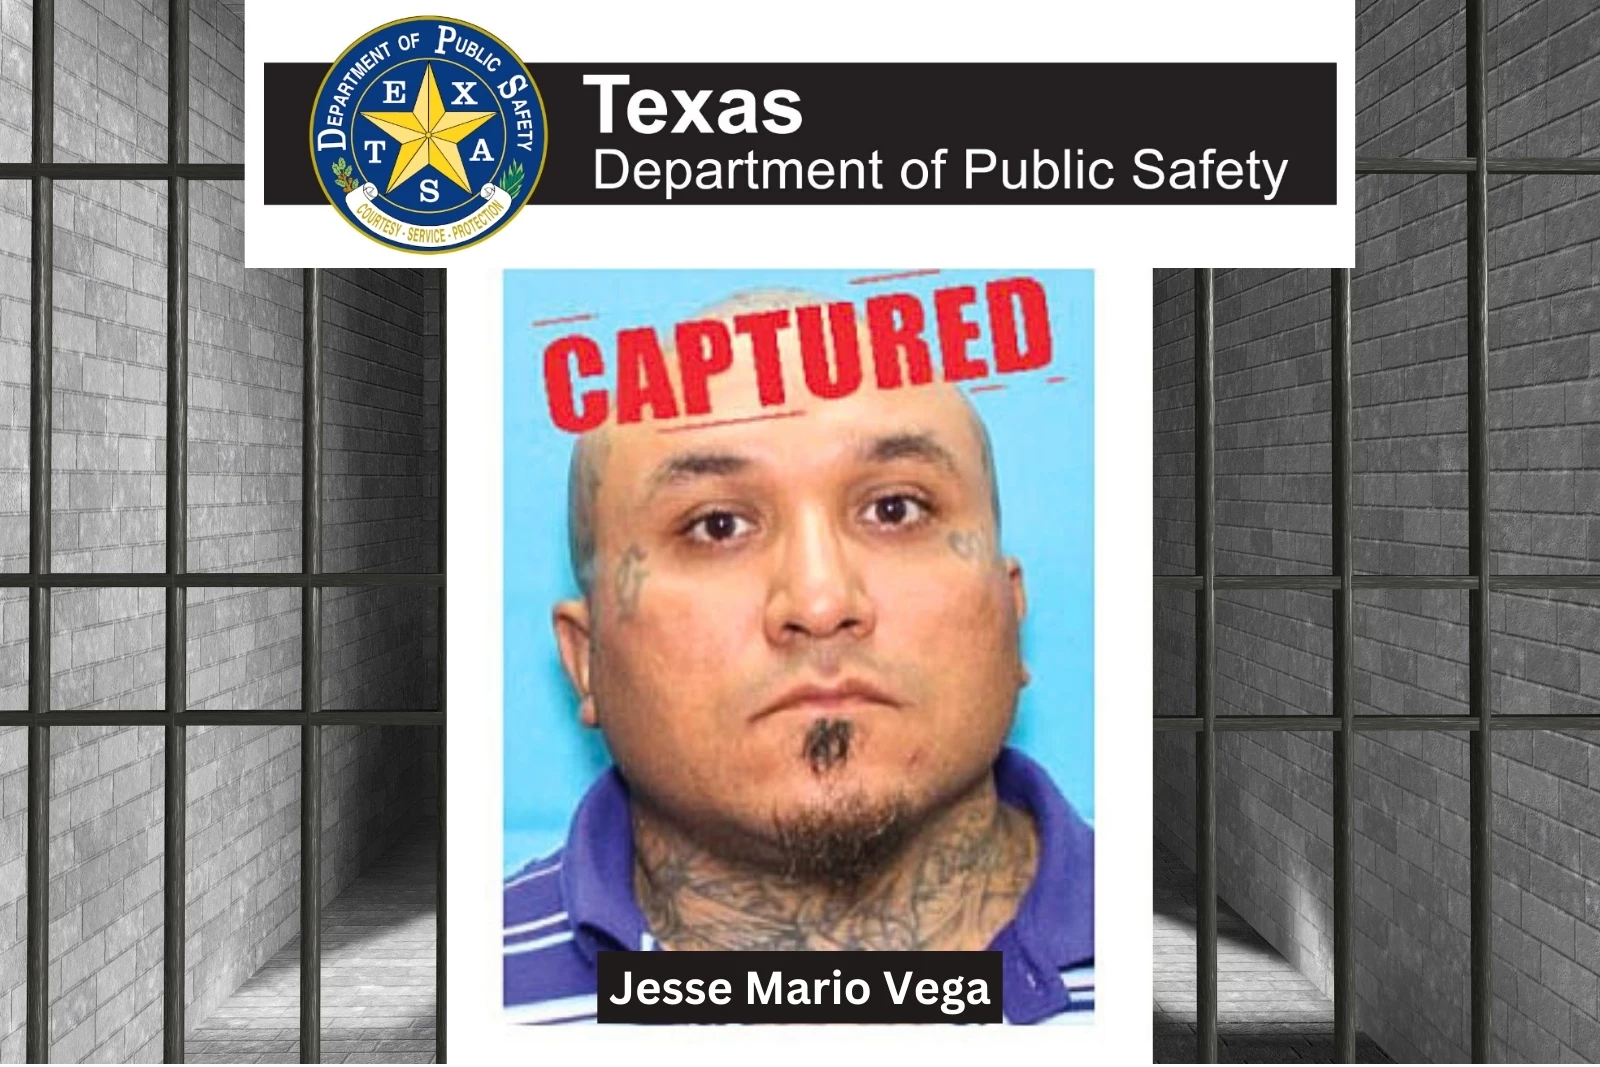 Photo by: DPS-Texas Crime Stoppers